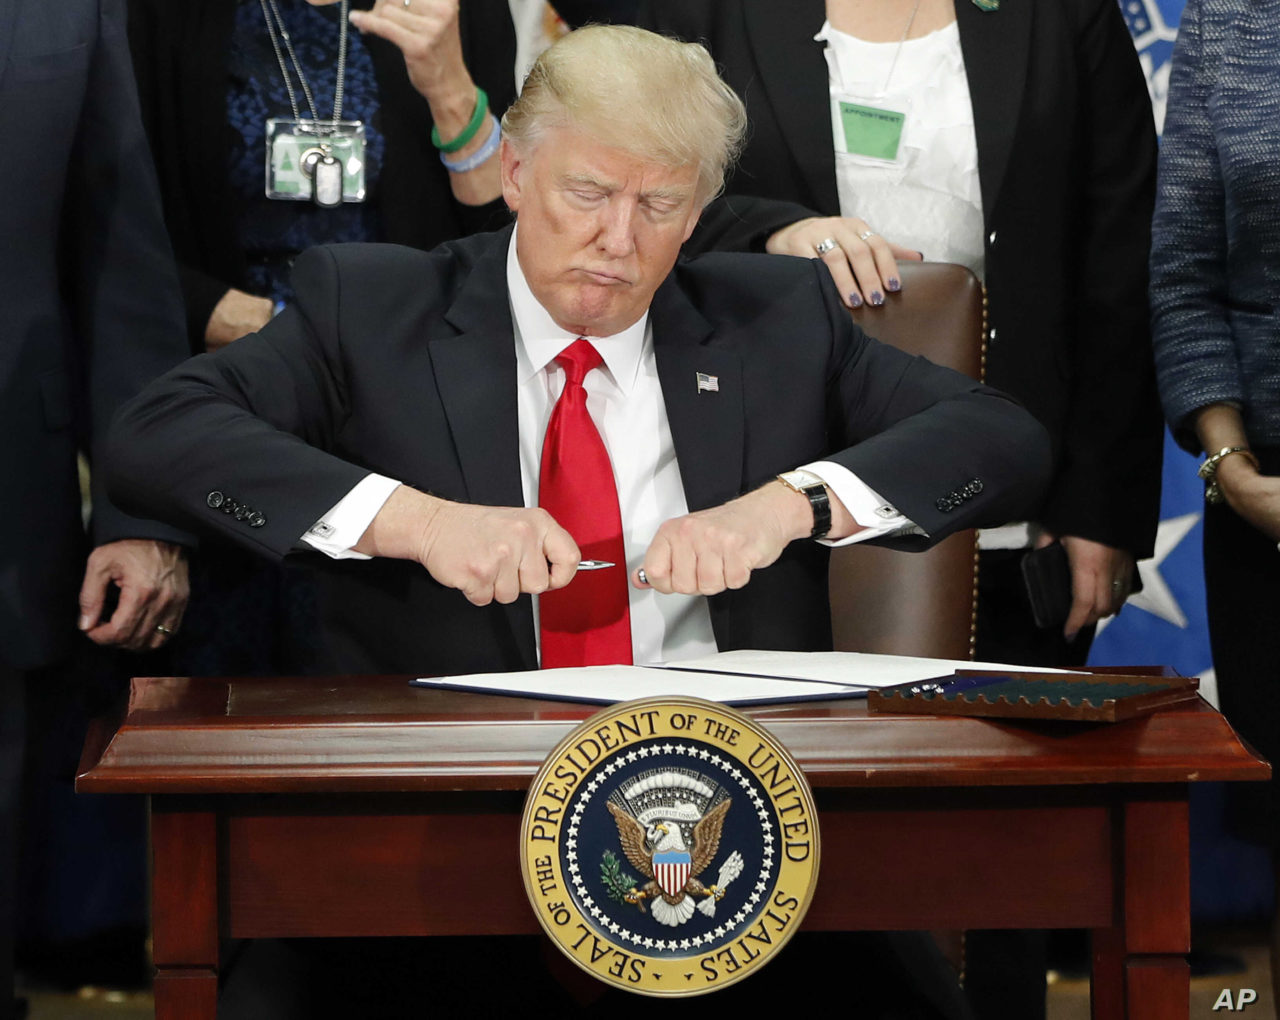 DAY 6 - In this Jan. 25, 2017, file photo, President Donald Trump takes the cap off a pen before signing executive order for immigration actions to build border wall during a visit to the Homeland Security Department in Washington. (AP Photo/Pablo Martinez Monsivais, File)